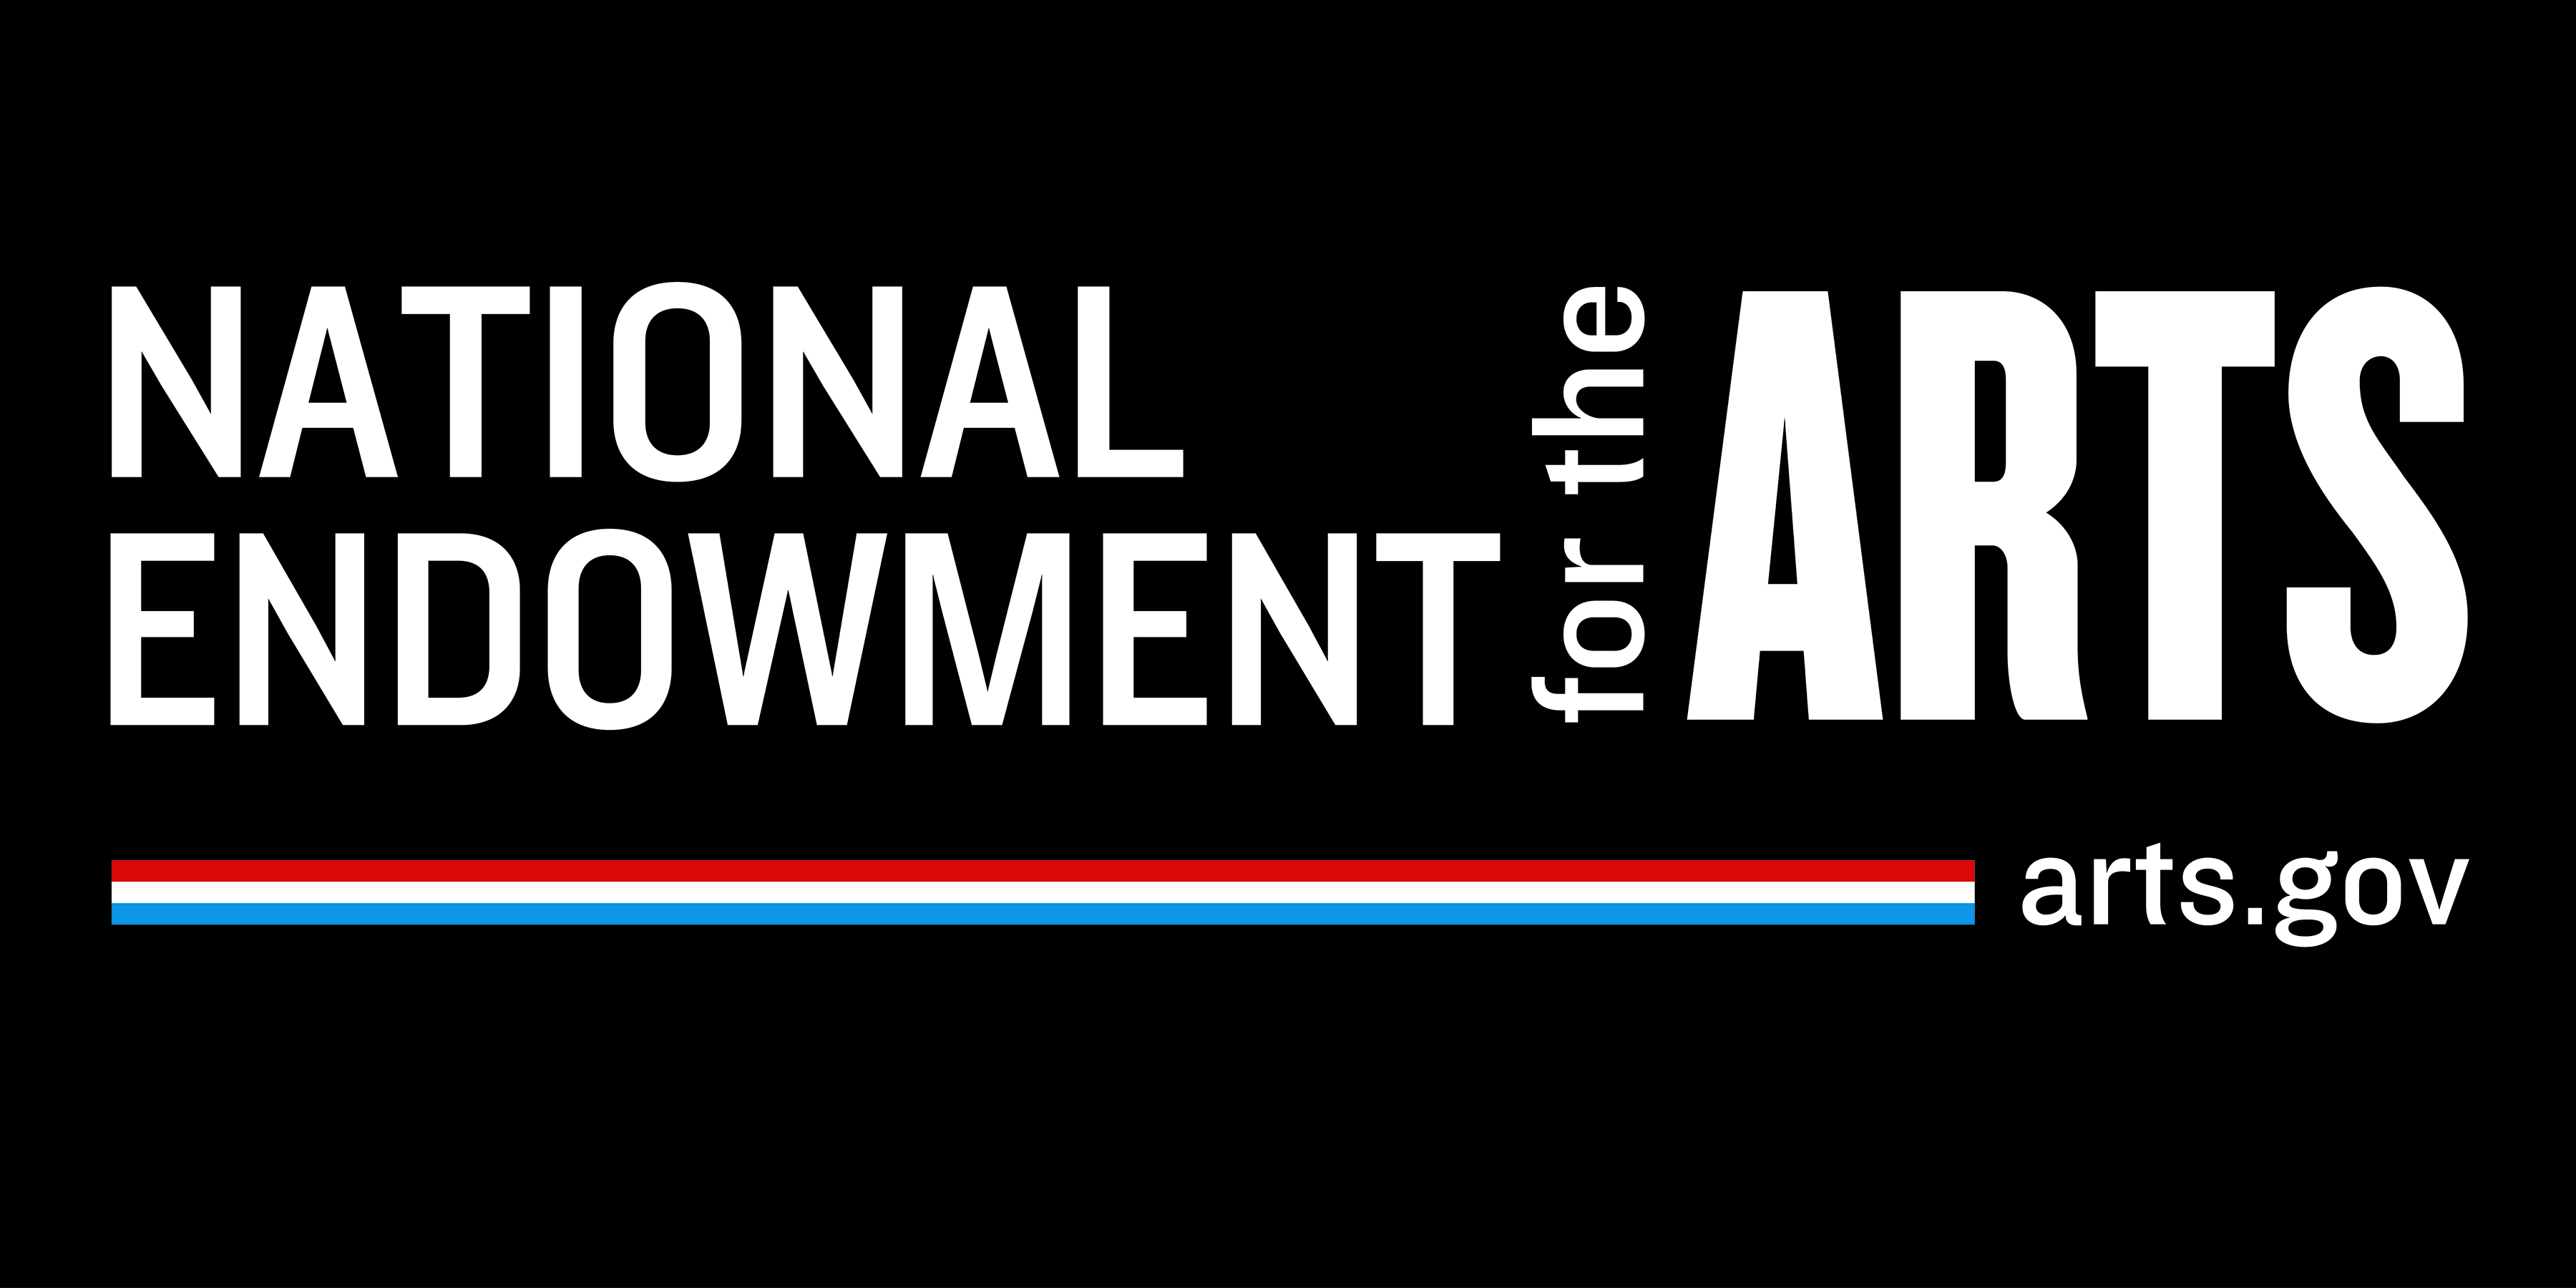 National Endowment for the Arts.